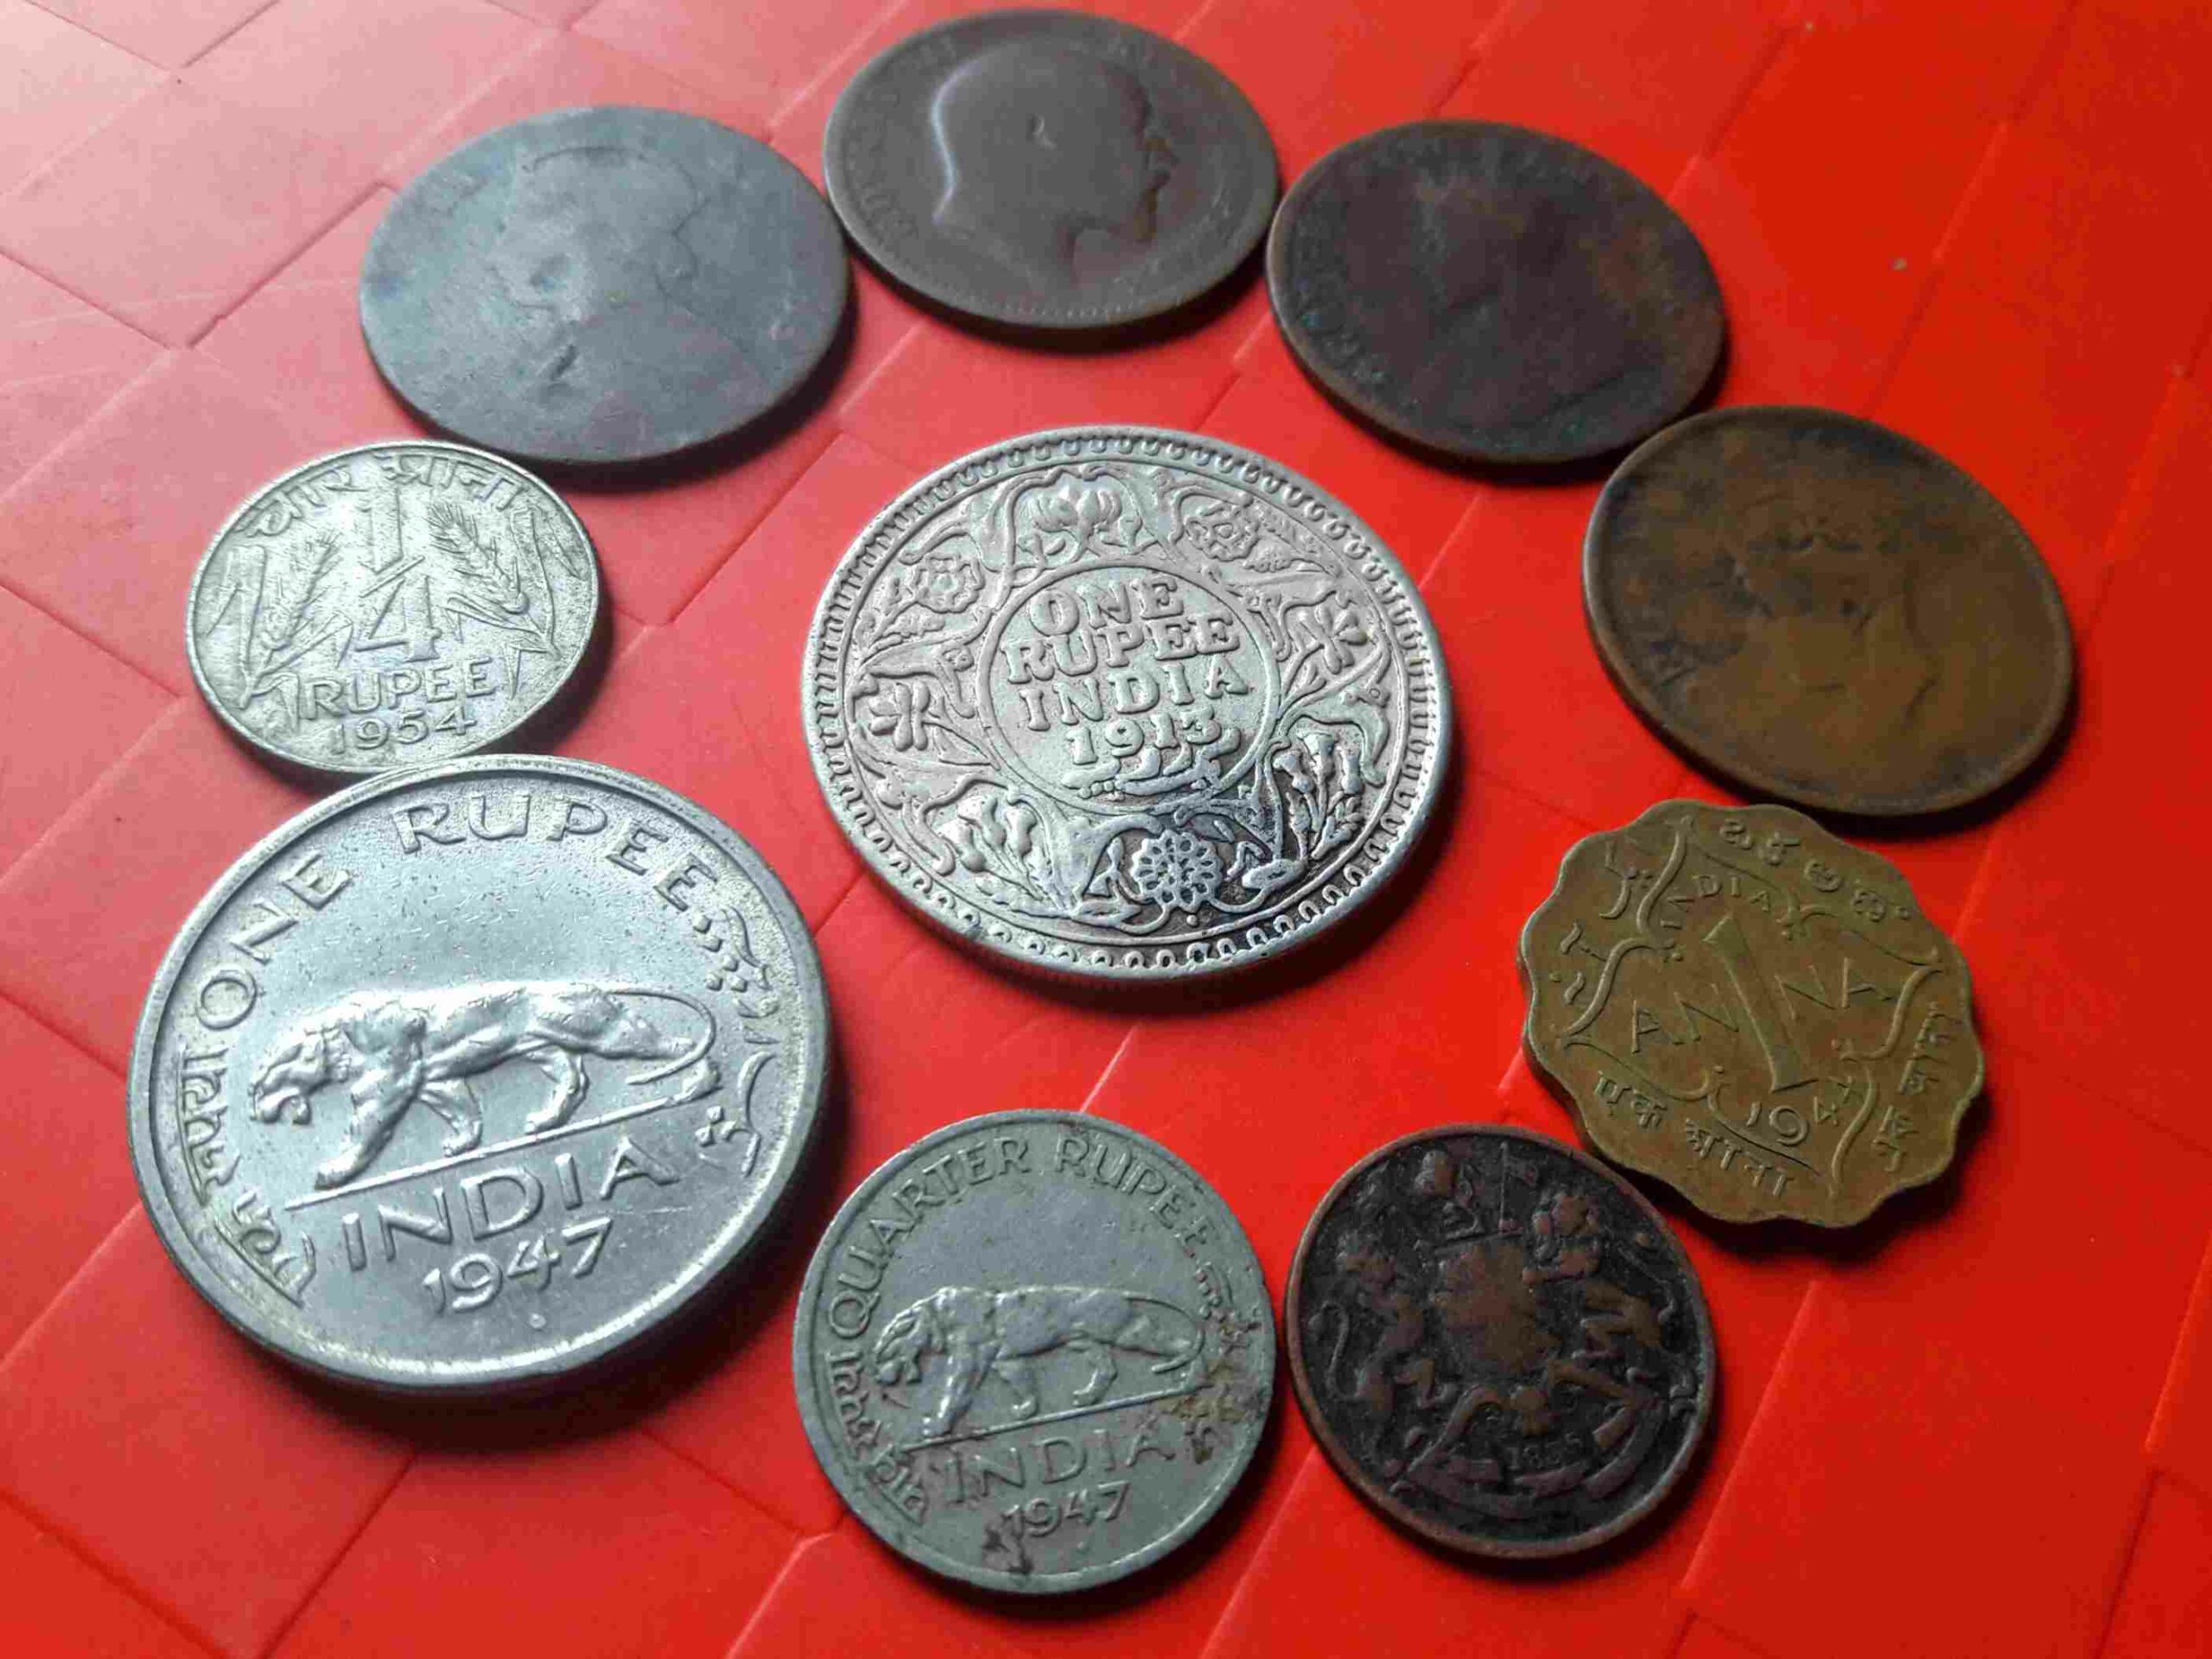 Coins from the British era dating back to pre-Independent India